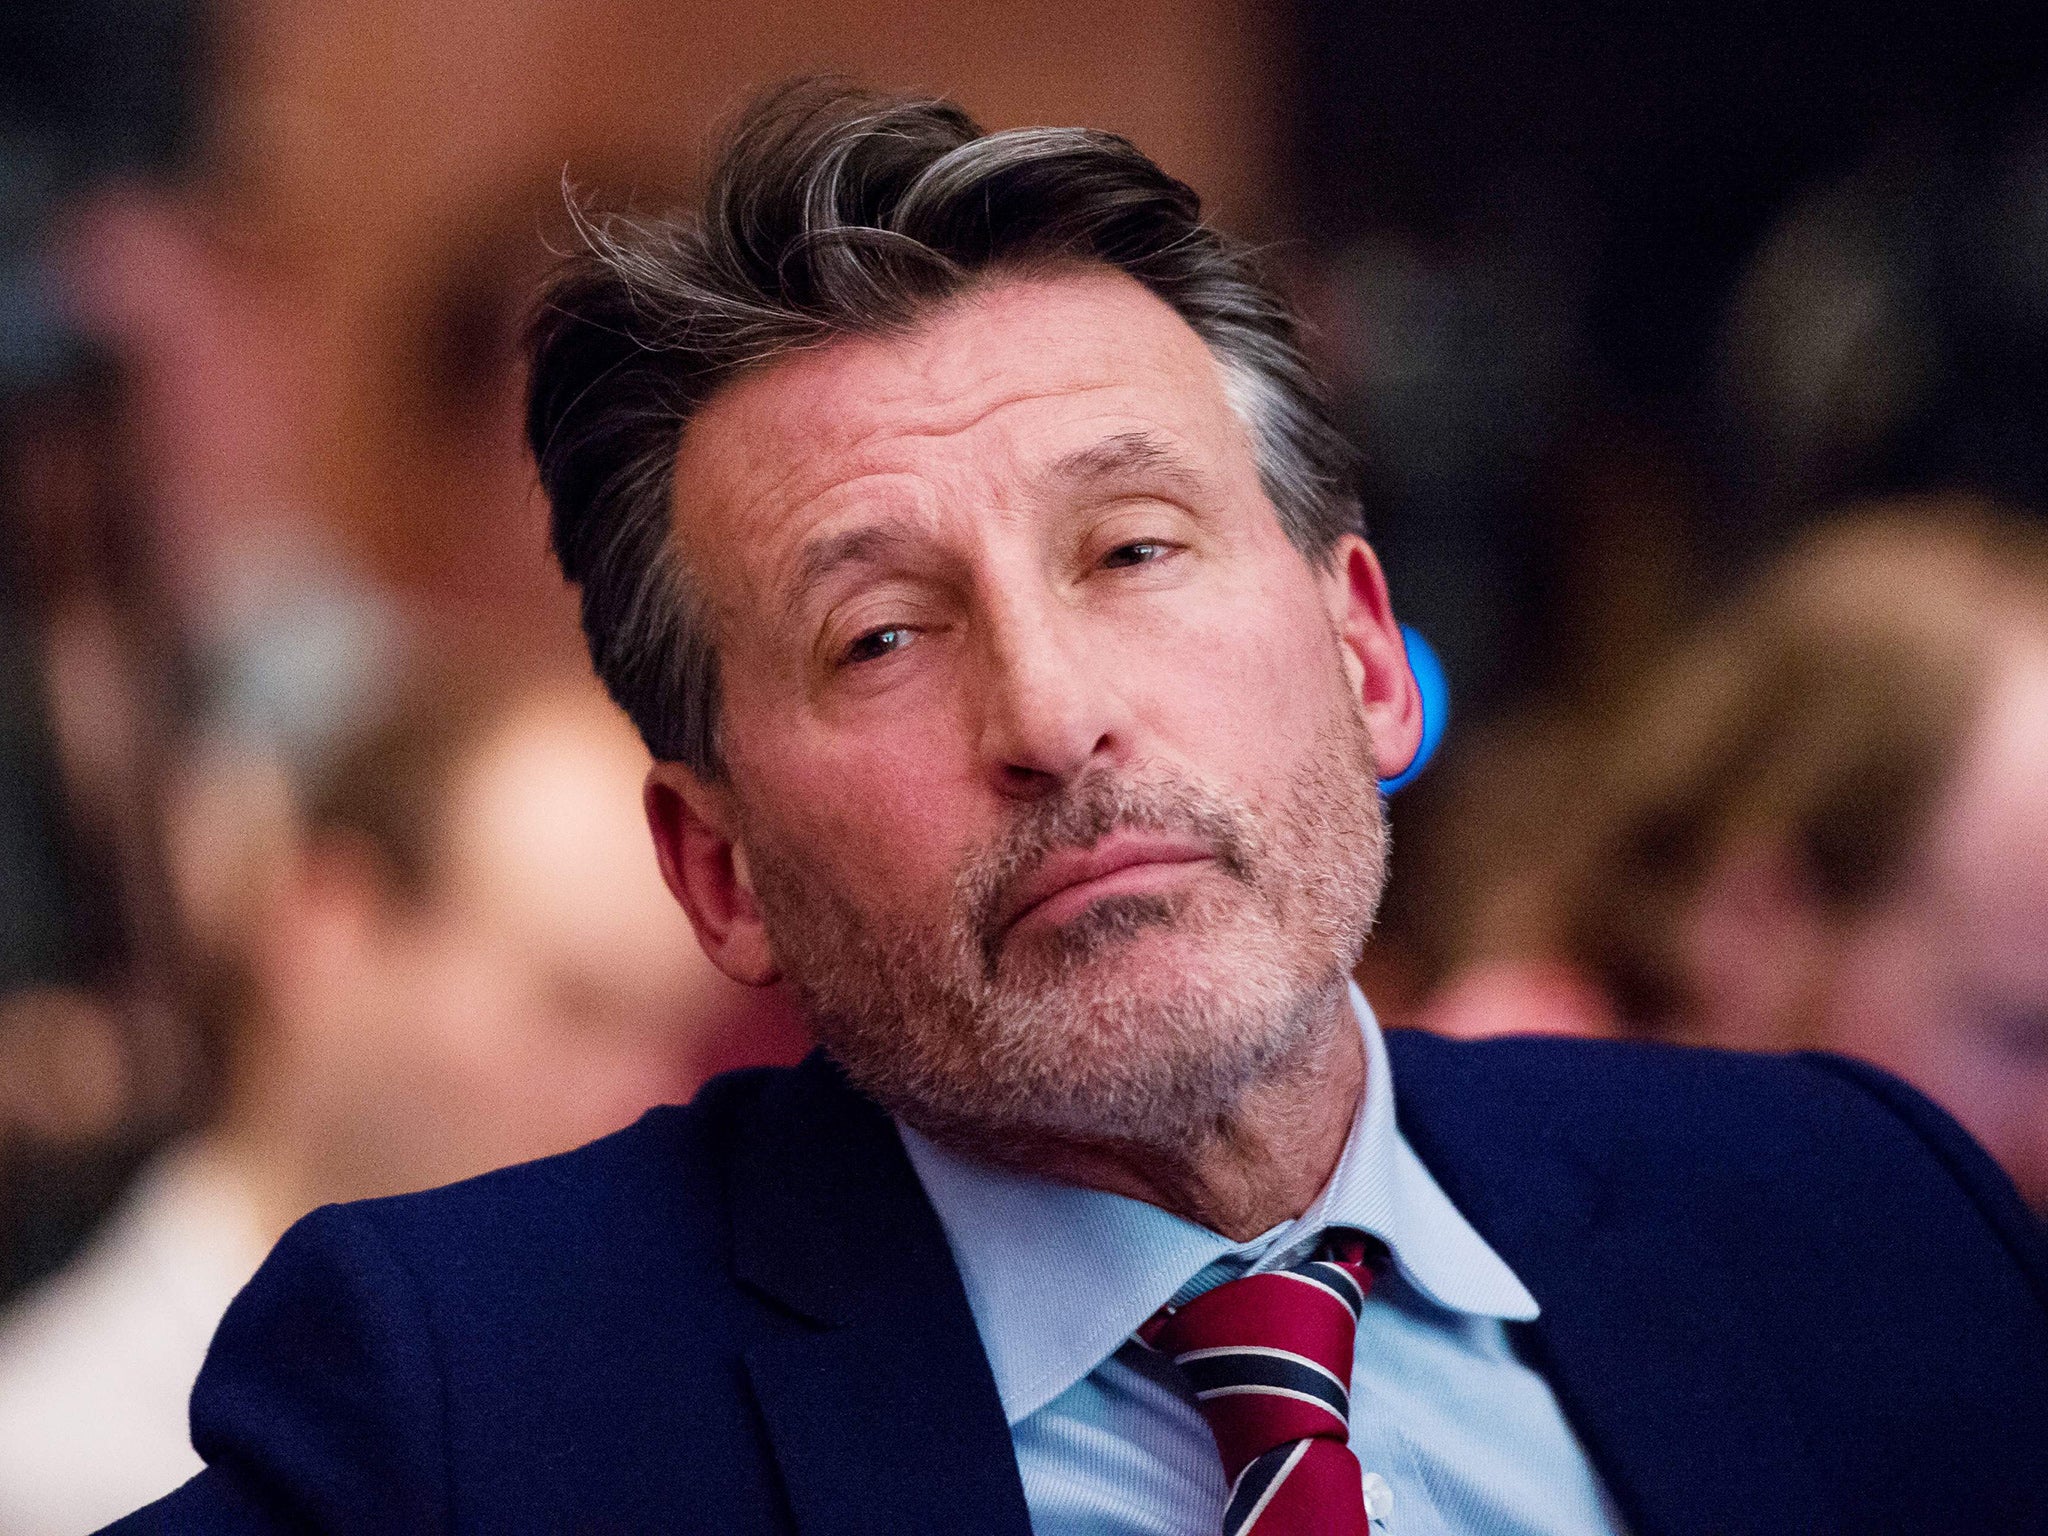 &#13;
IAAF president Lord Coe's position has been called into question&#13;